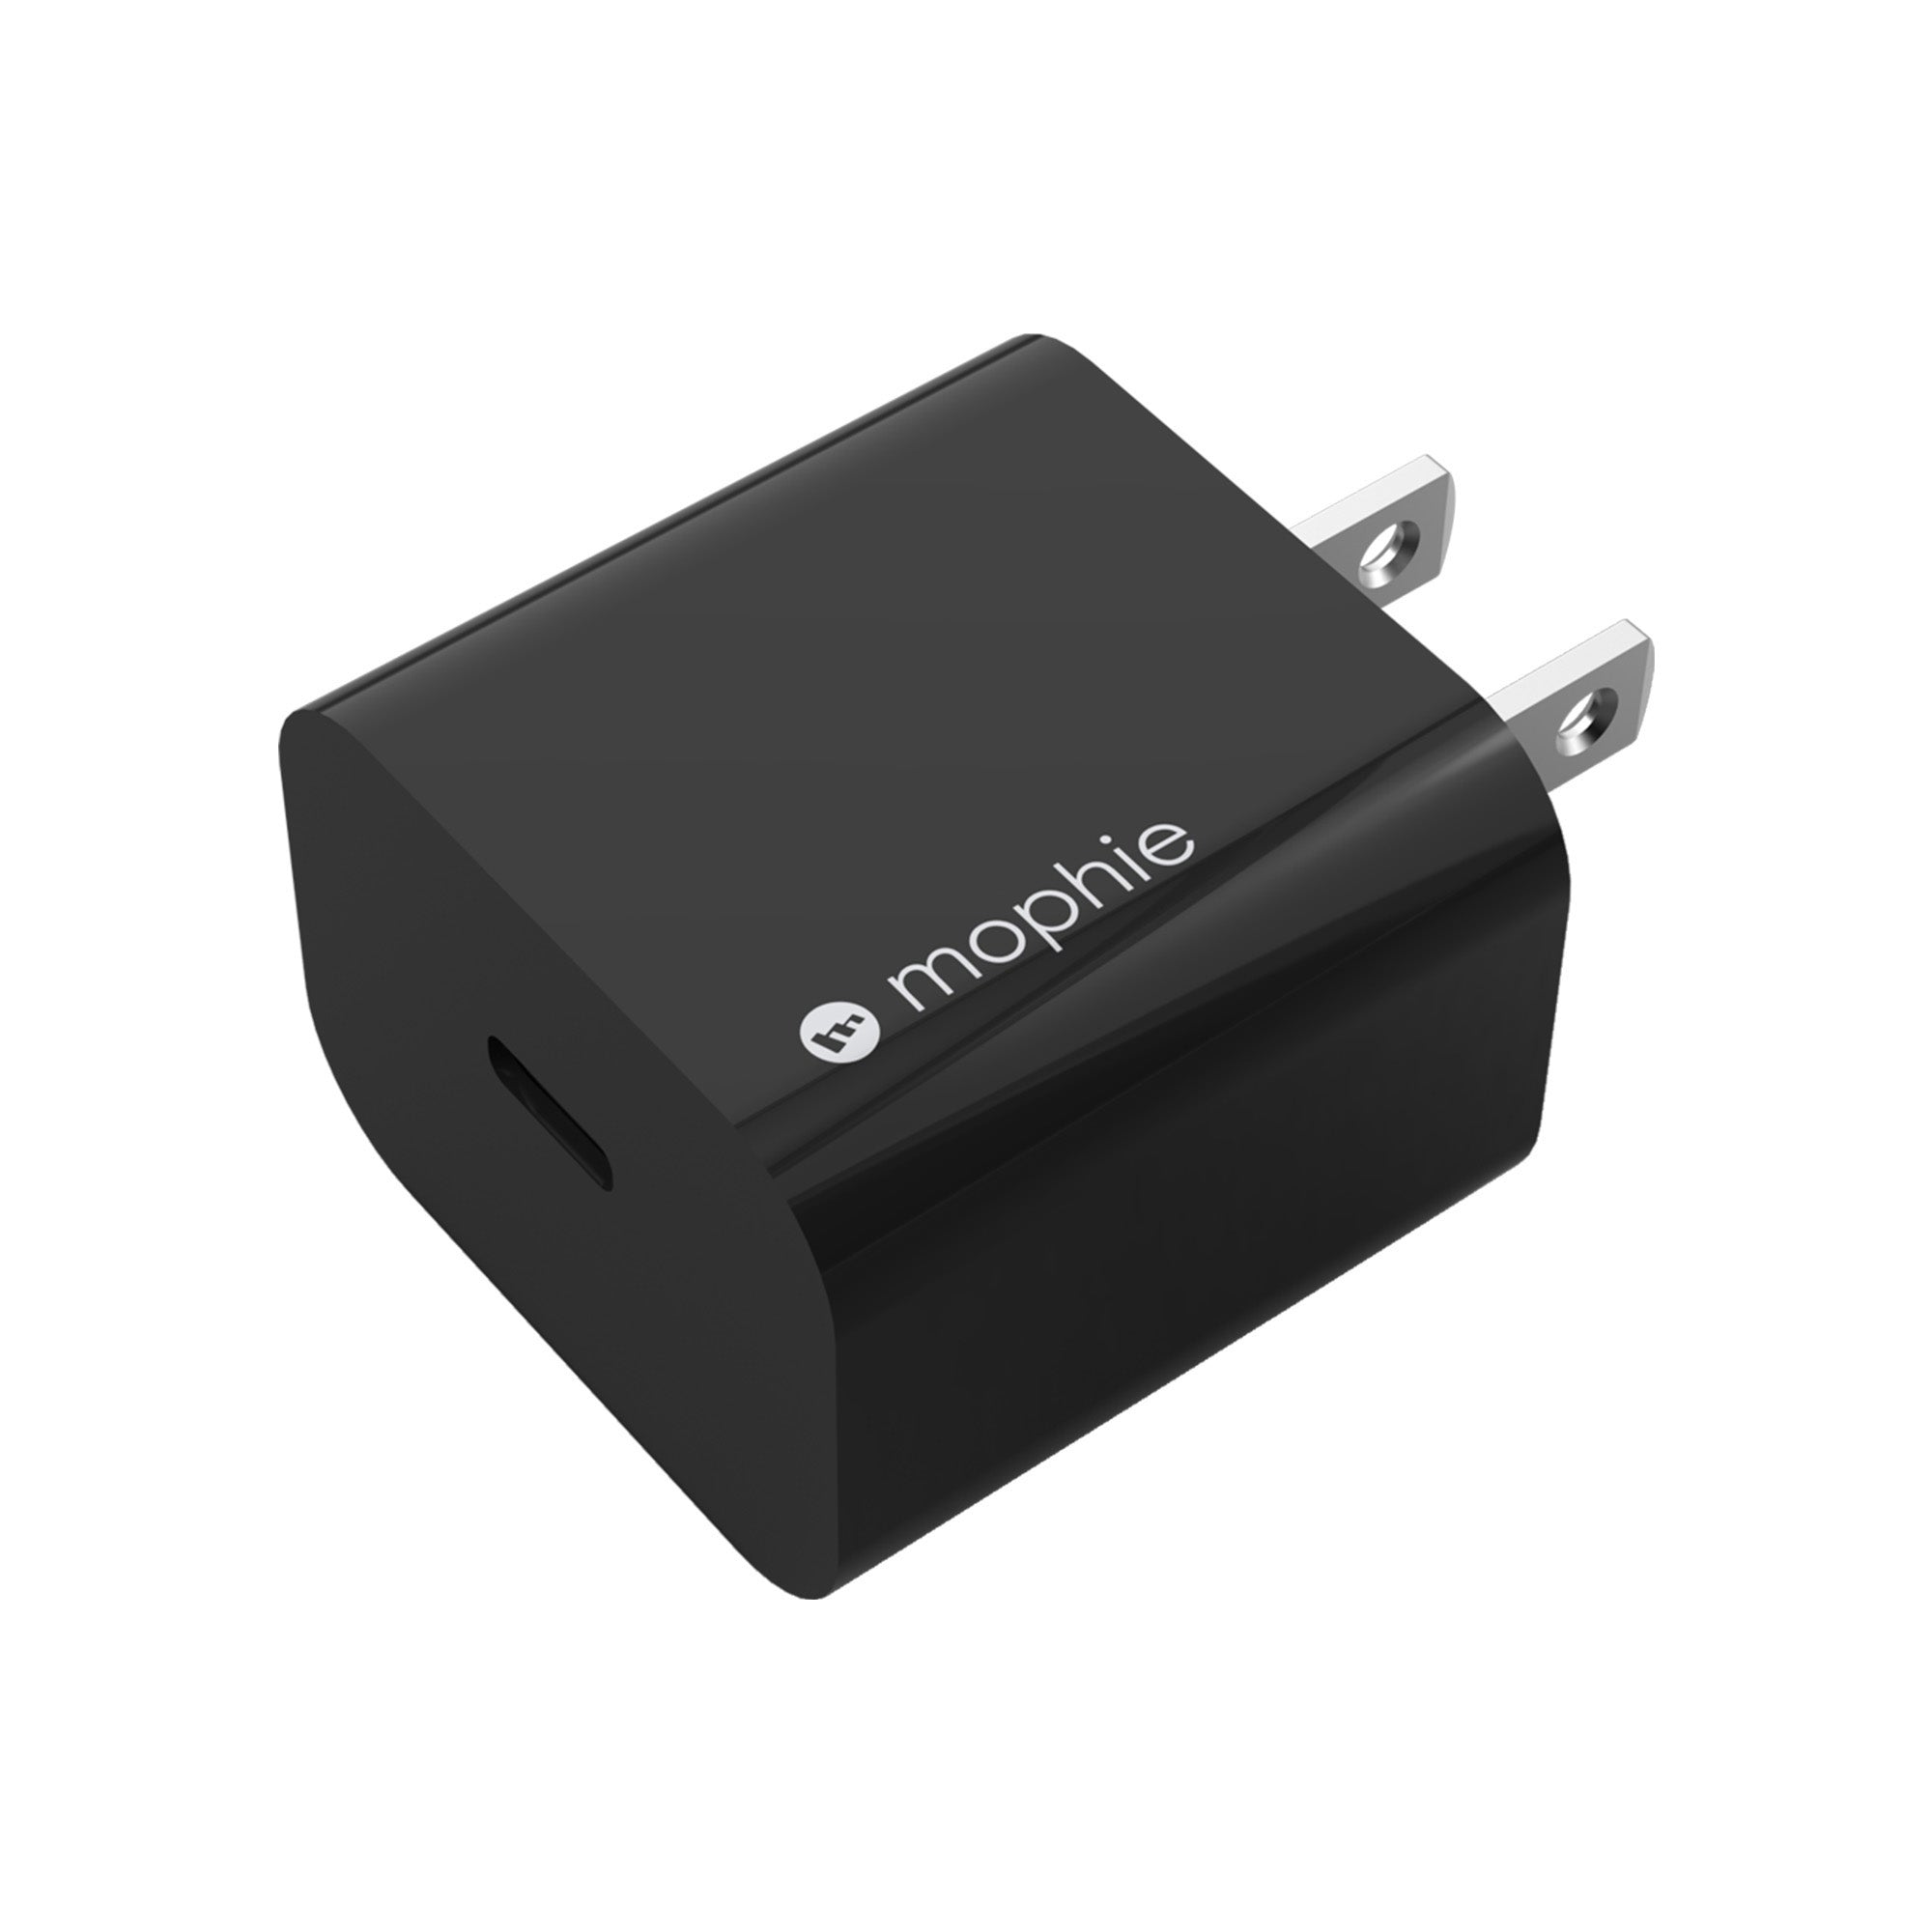 Mophie 20W black USB-C PD Wall Charger - 15-08489